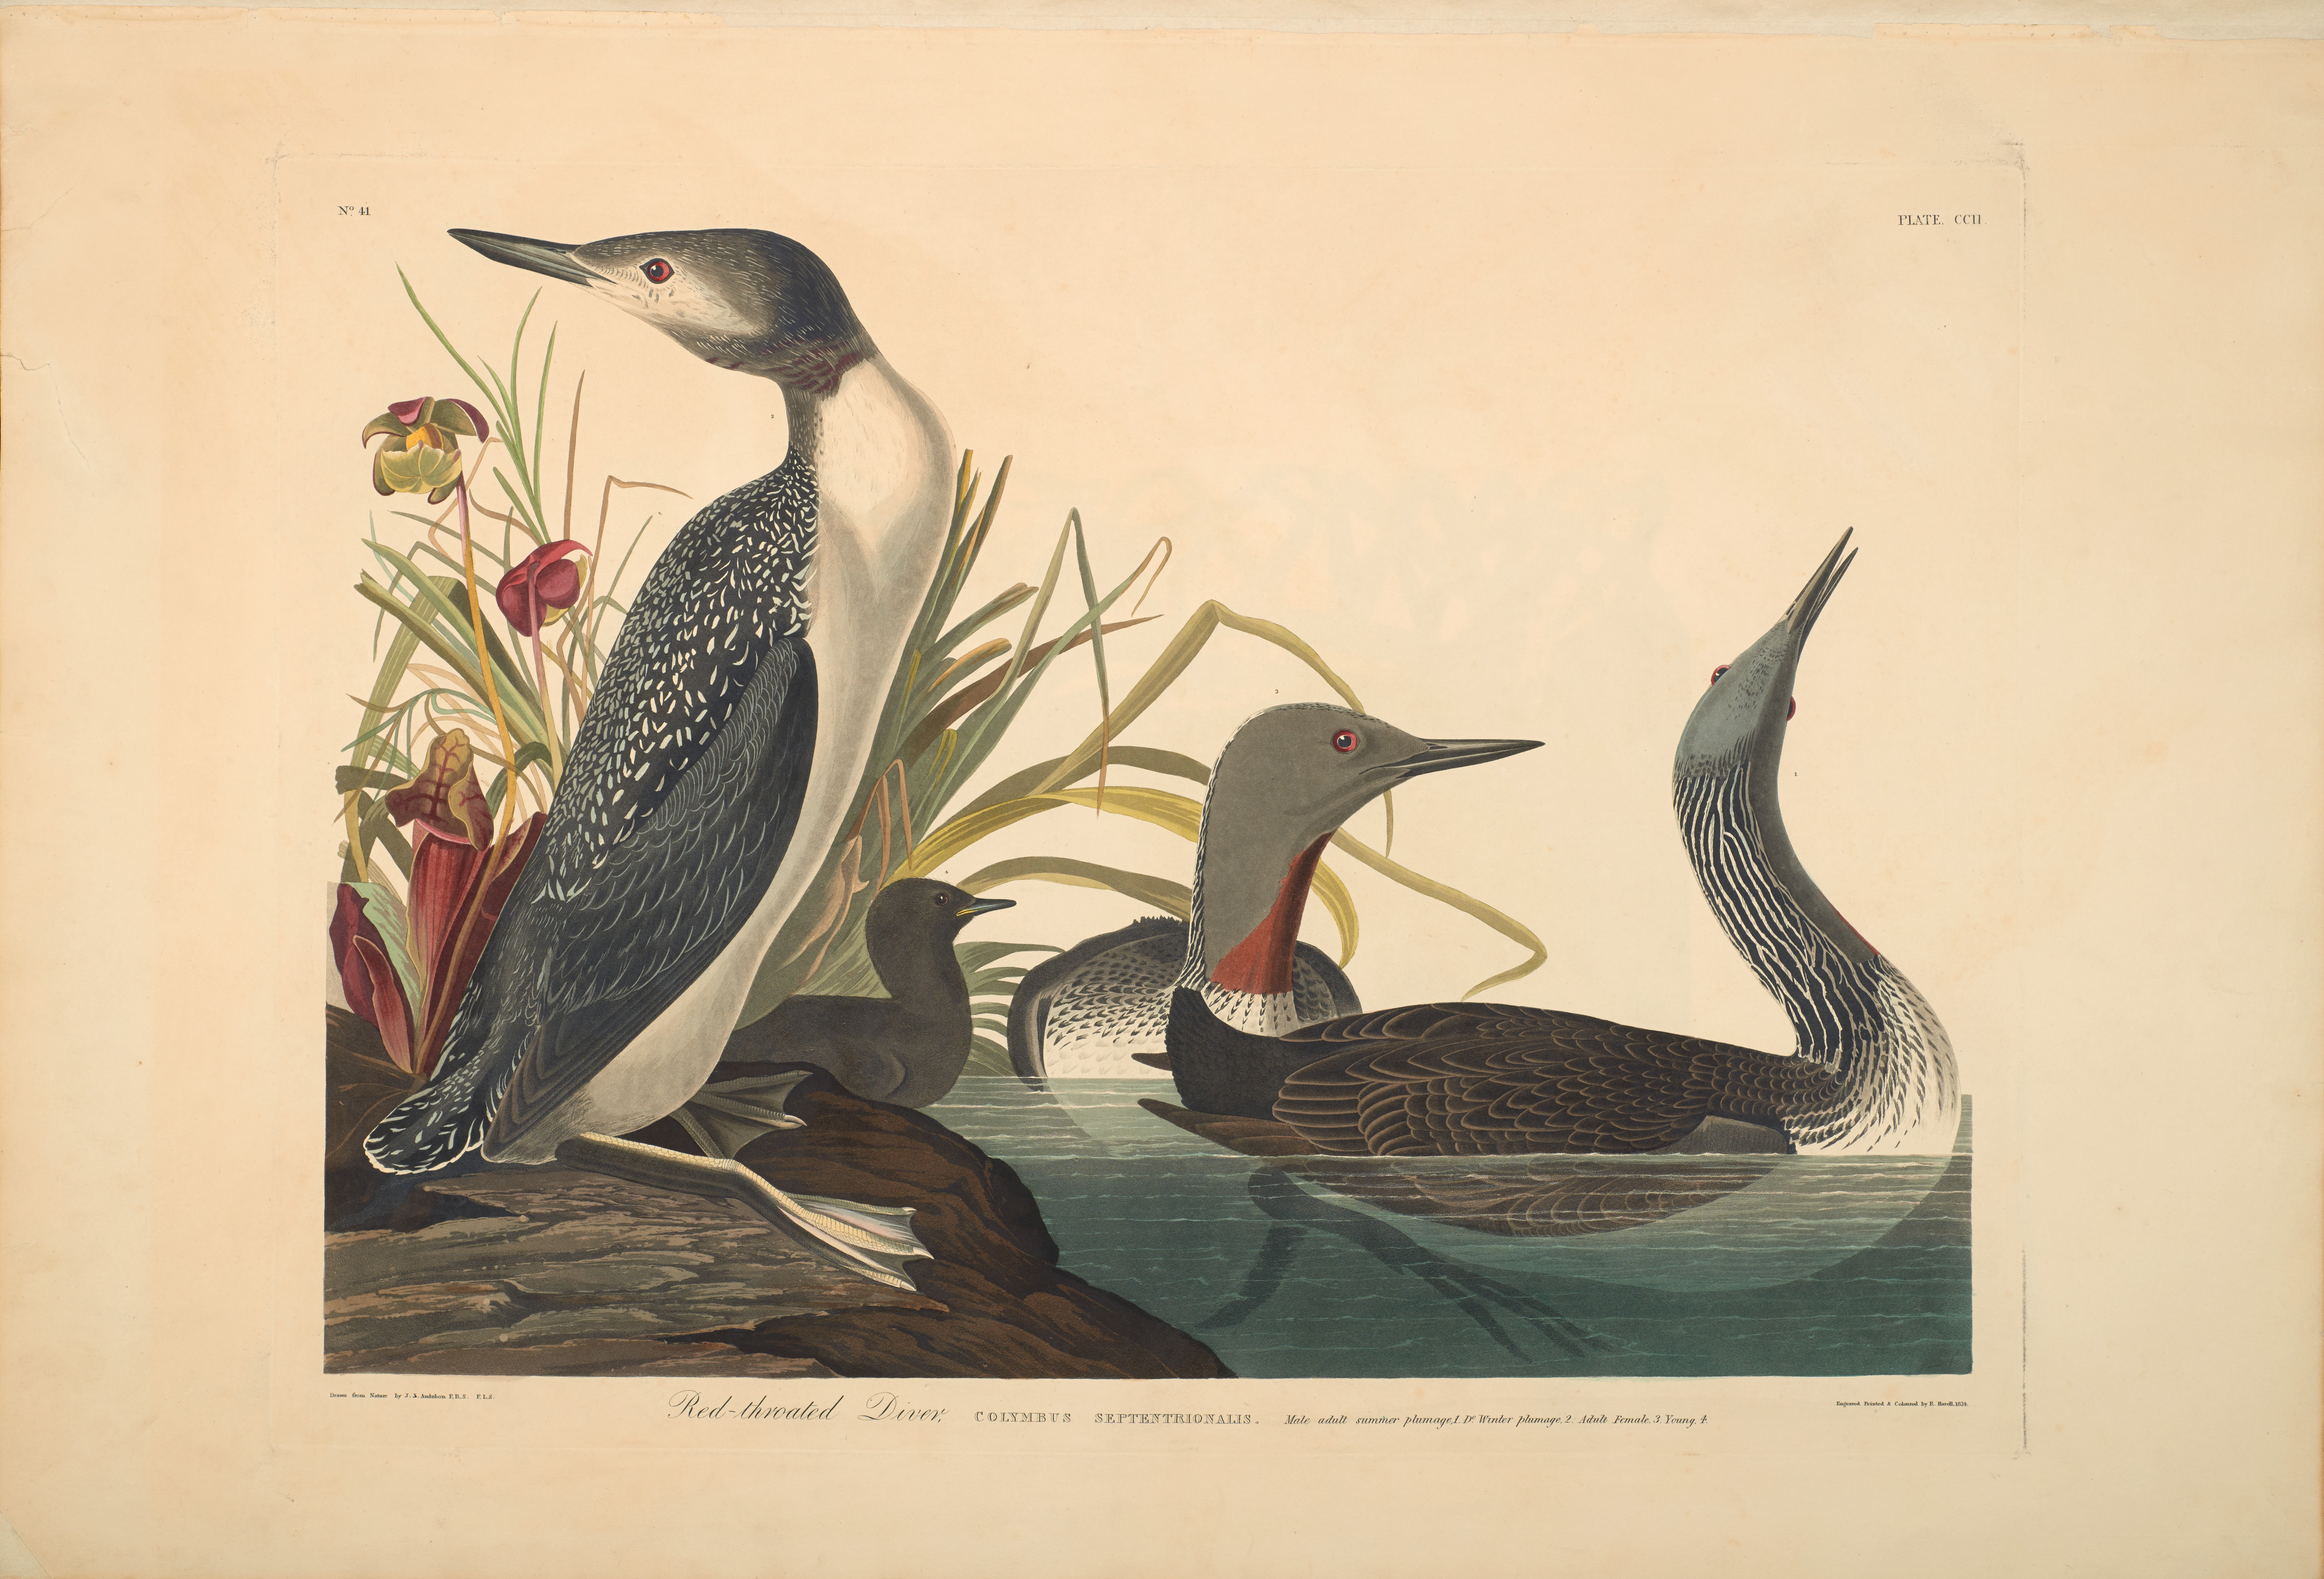 He was instrumental in bringing back an exhibition of John James Audubon’s The Birds of America starting February 16. Today only about 200 complete sets of The Birds of America exist in the world, and NCMA owns one.